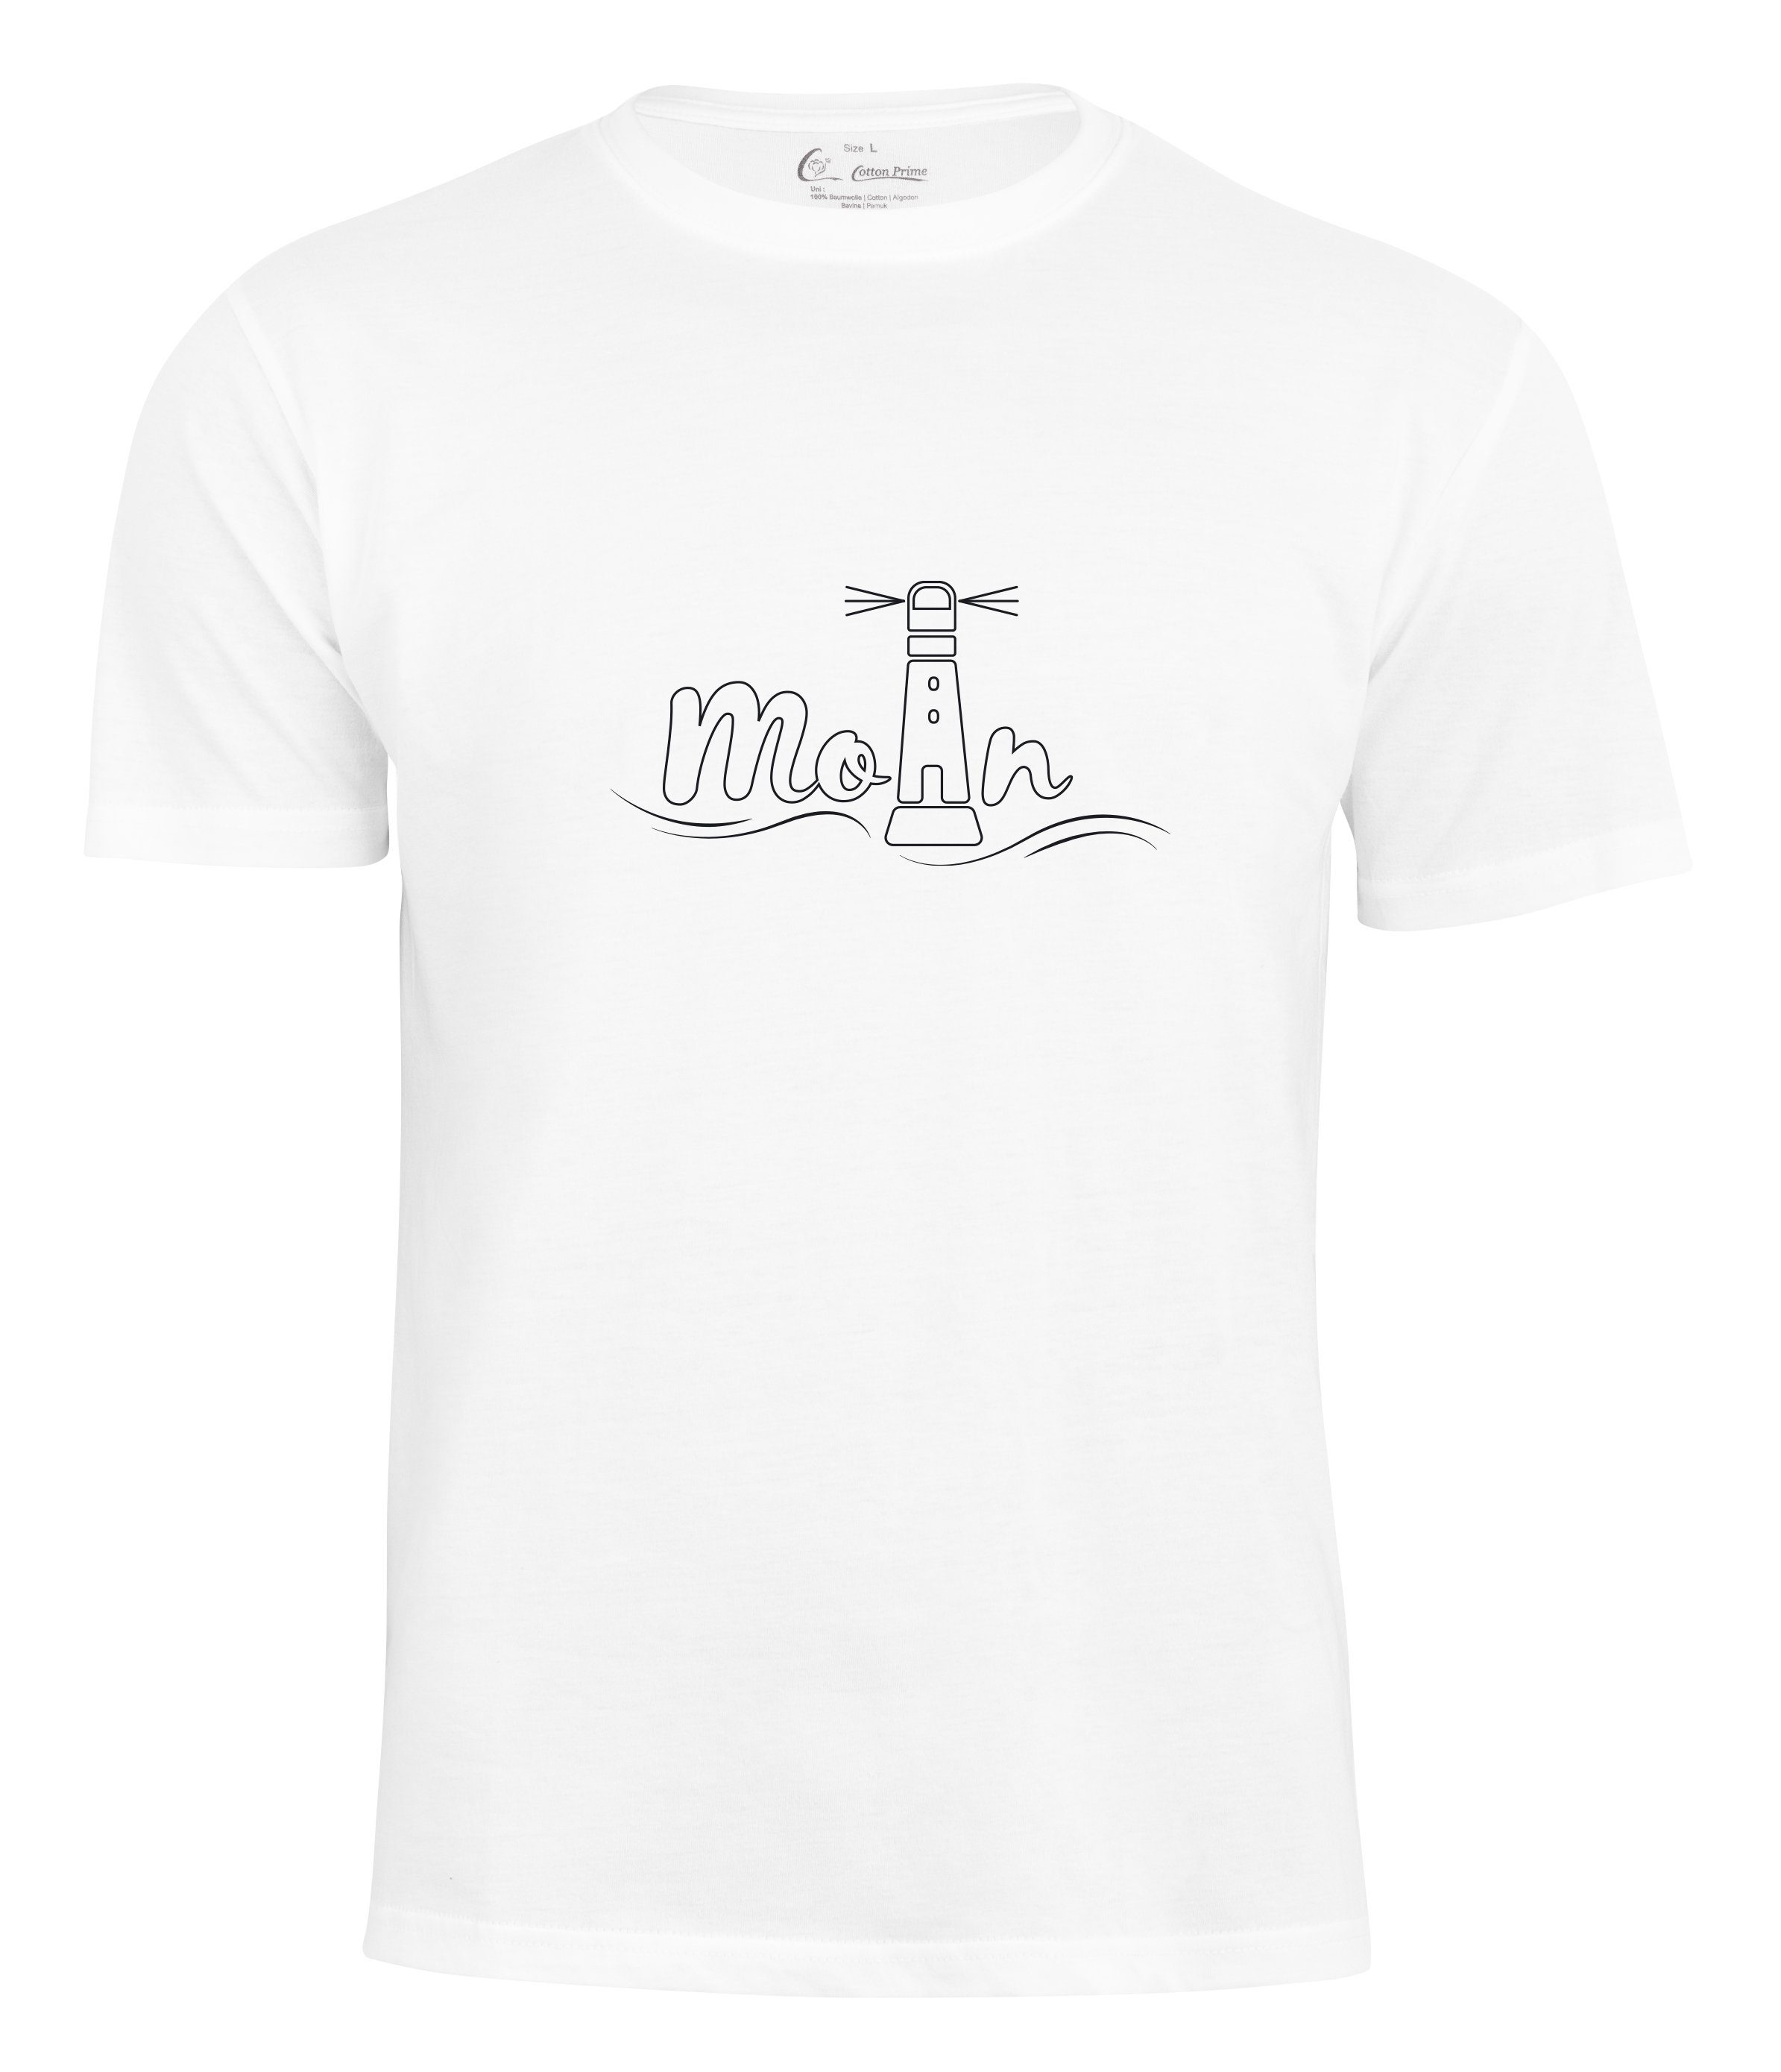 T-Shirt Weiss - Cotton Moin Prime®